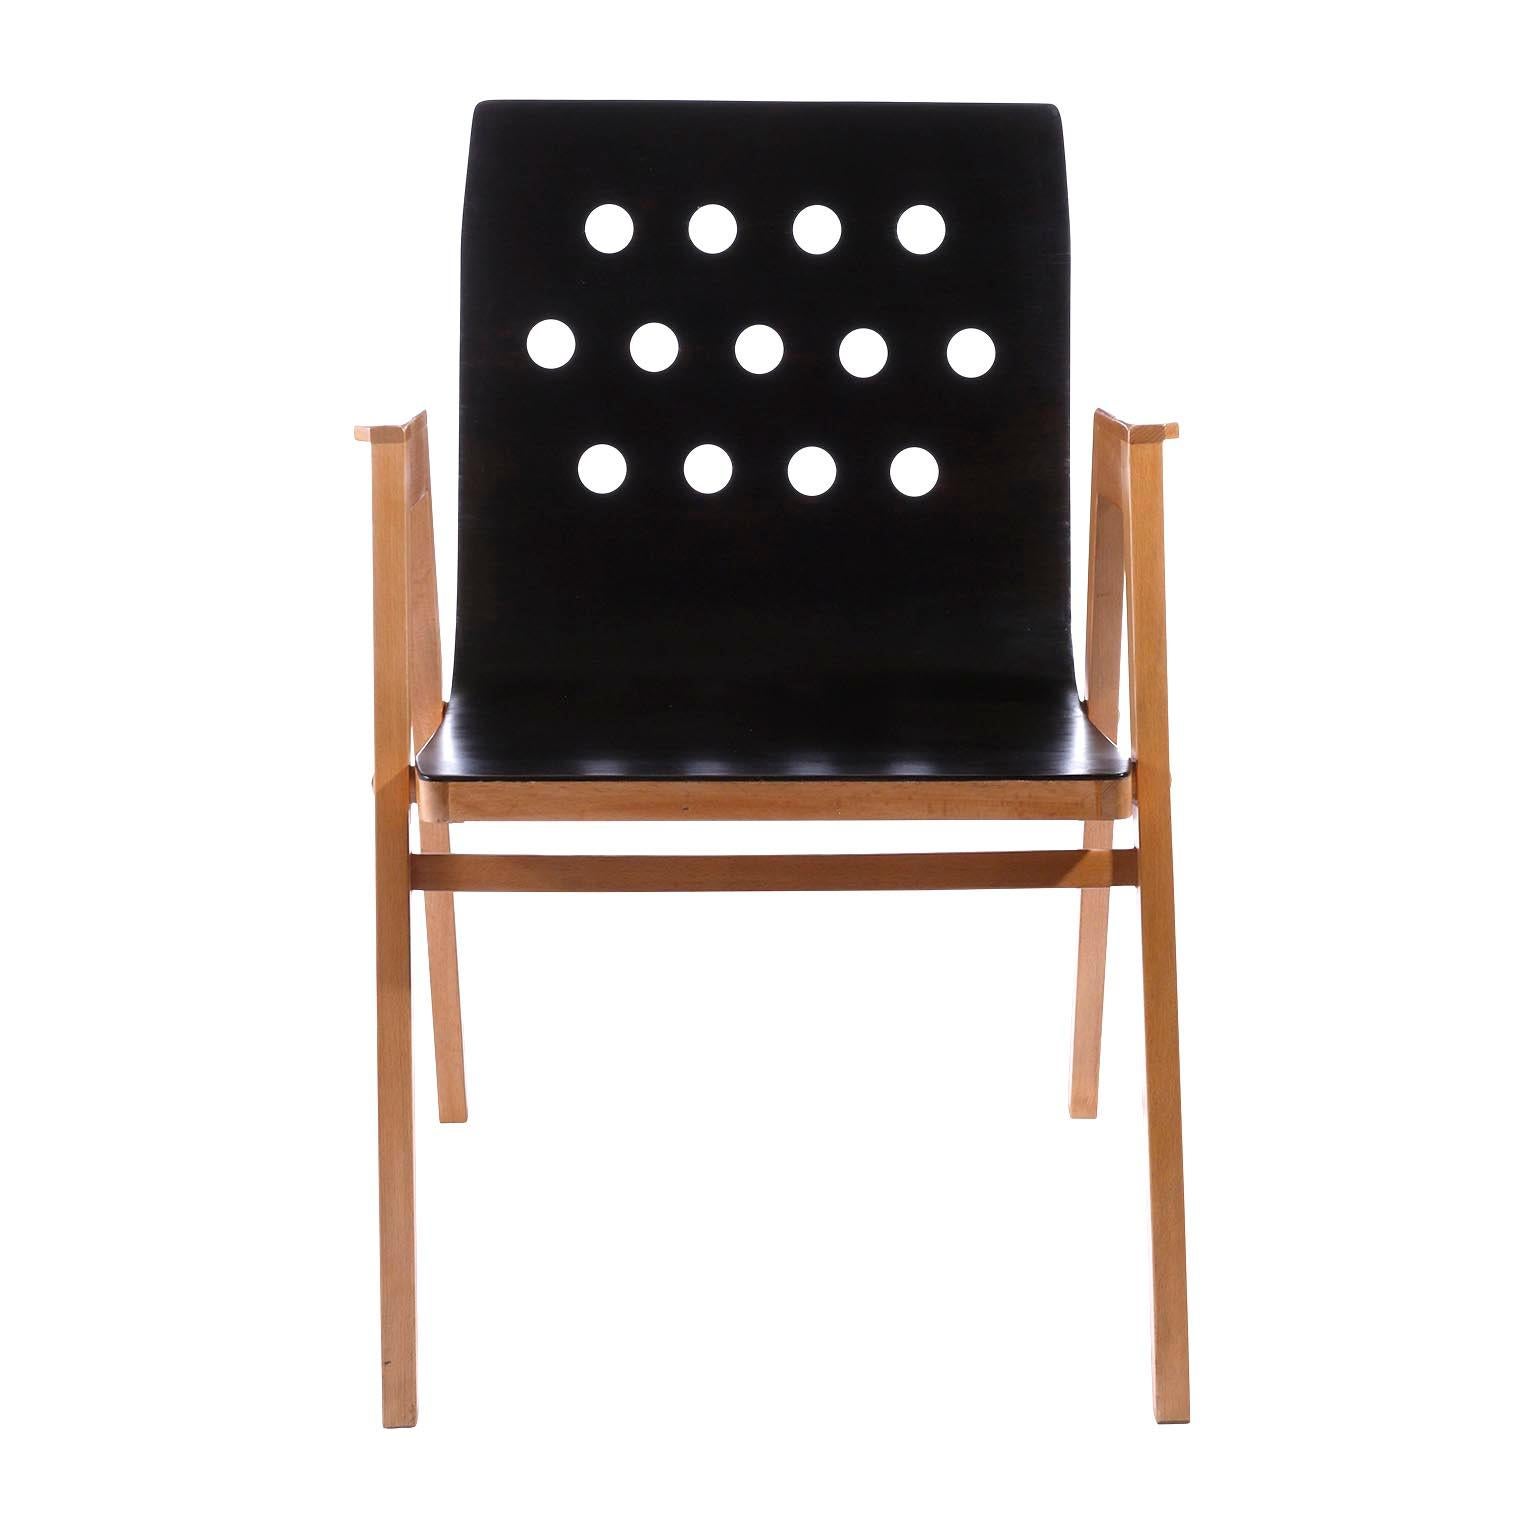 A set of six stackable chairs designed by Prof. Roland Rainer in 1951 and manufactured by Emil & Alfred Pollak, Austria, in 1950s.
Roland Rainer used these chairs for the Viennese city hall 